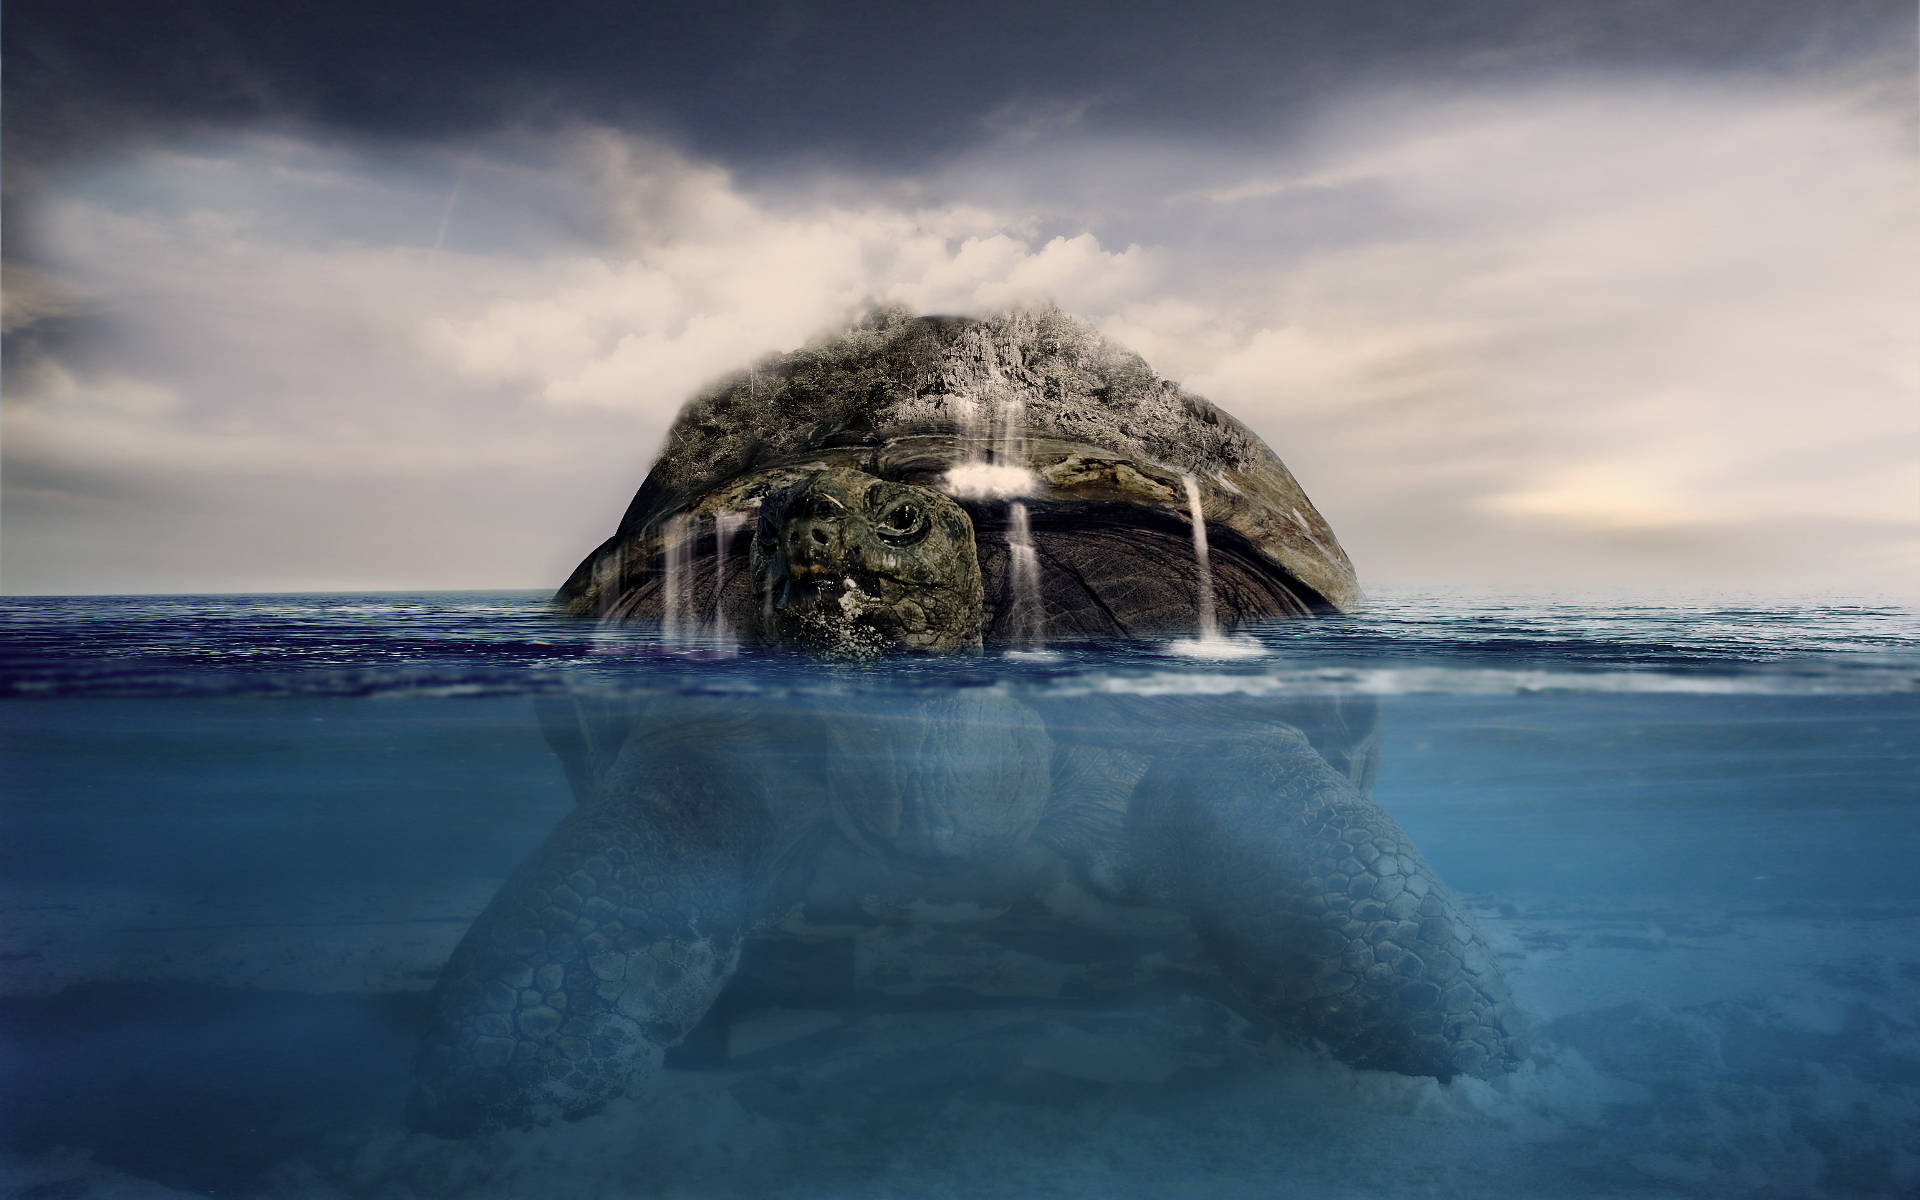 Gigantic Cool Turtle In The Sea Background